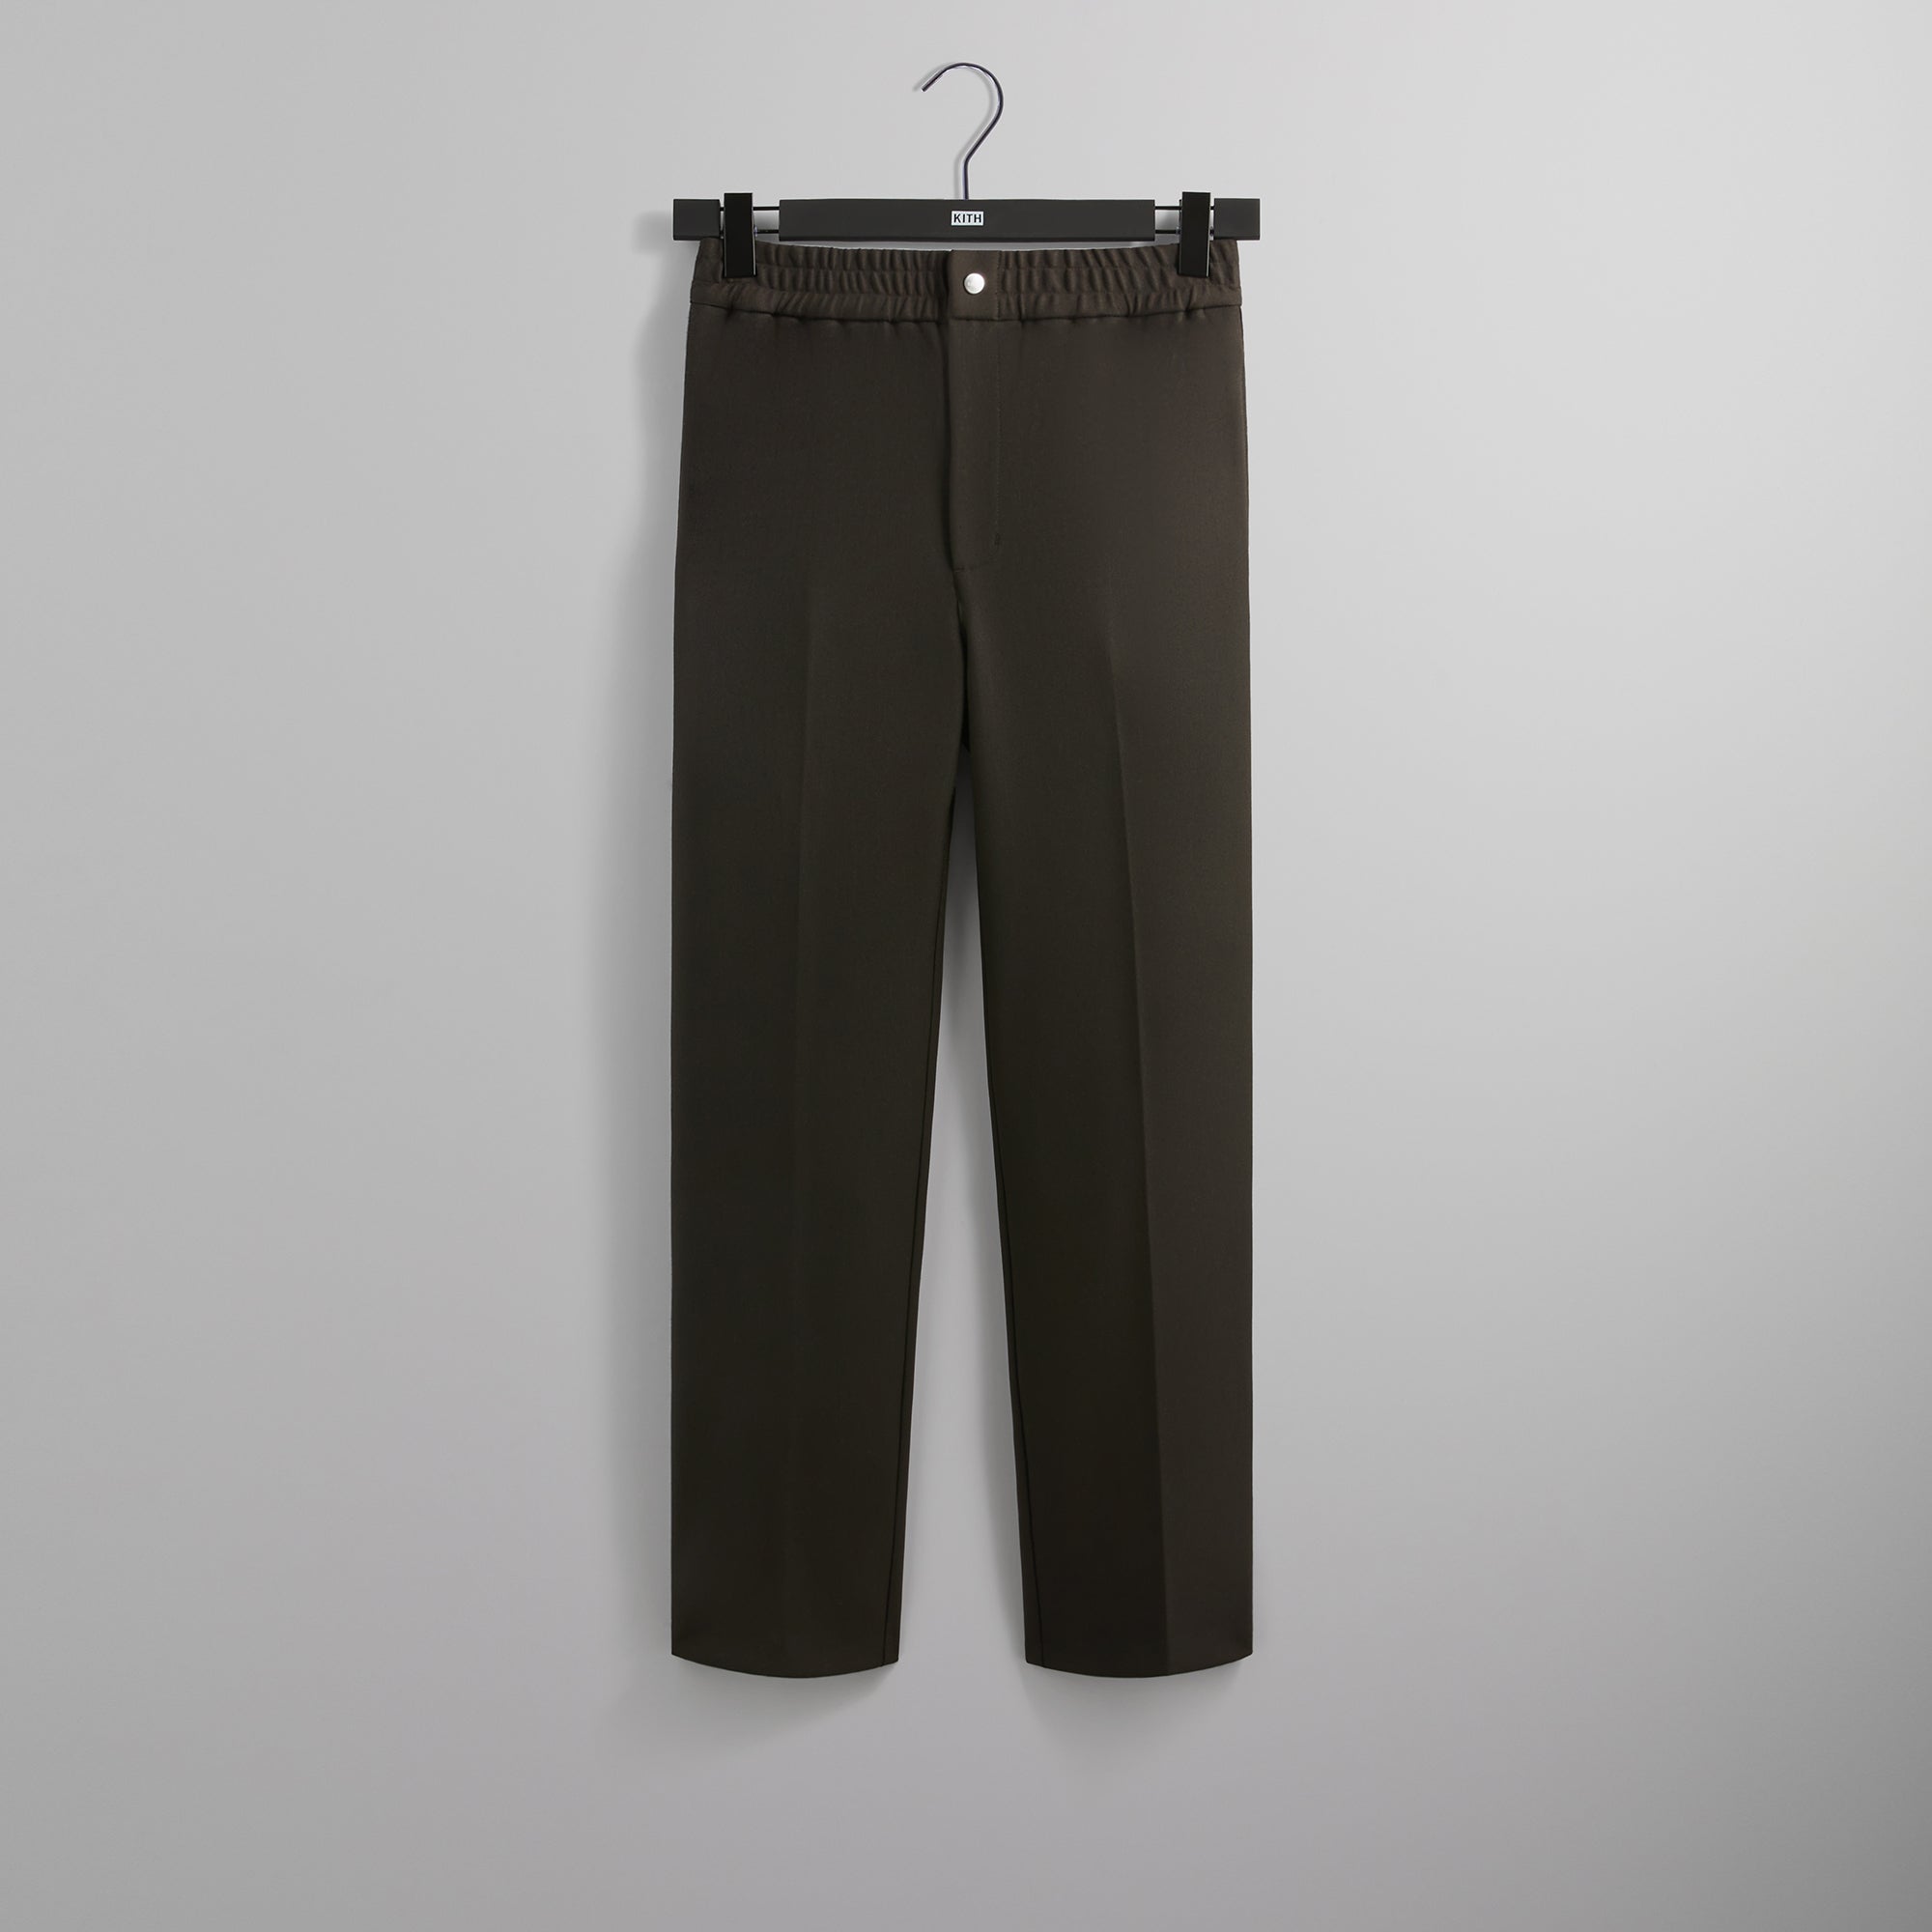 Kith x Needles / Double Knit Track Pant - その他